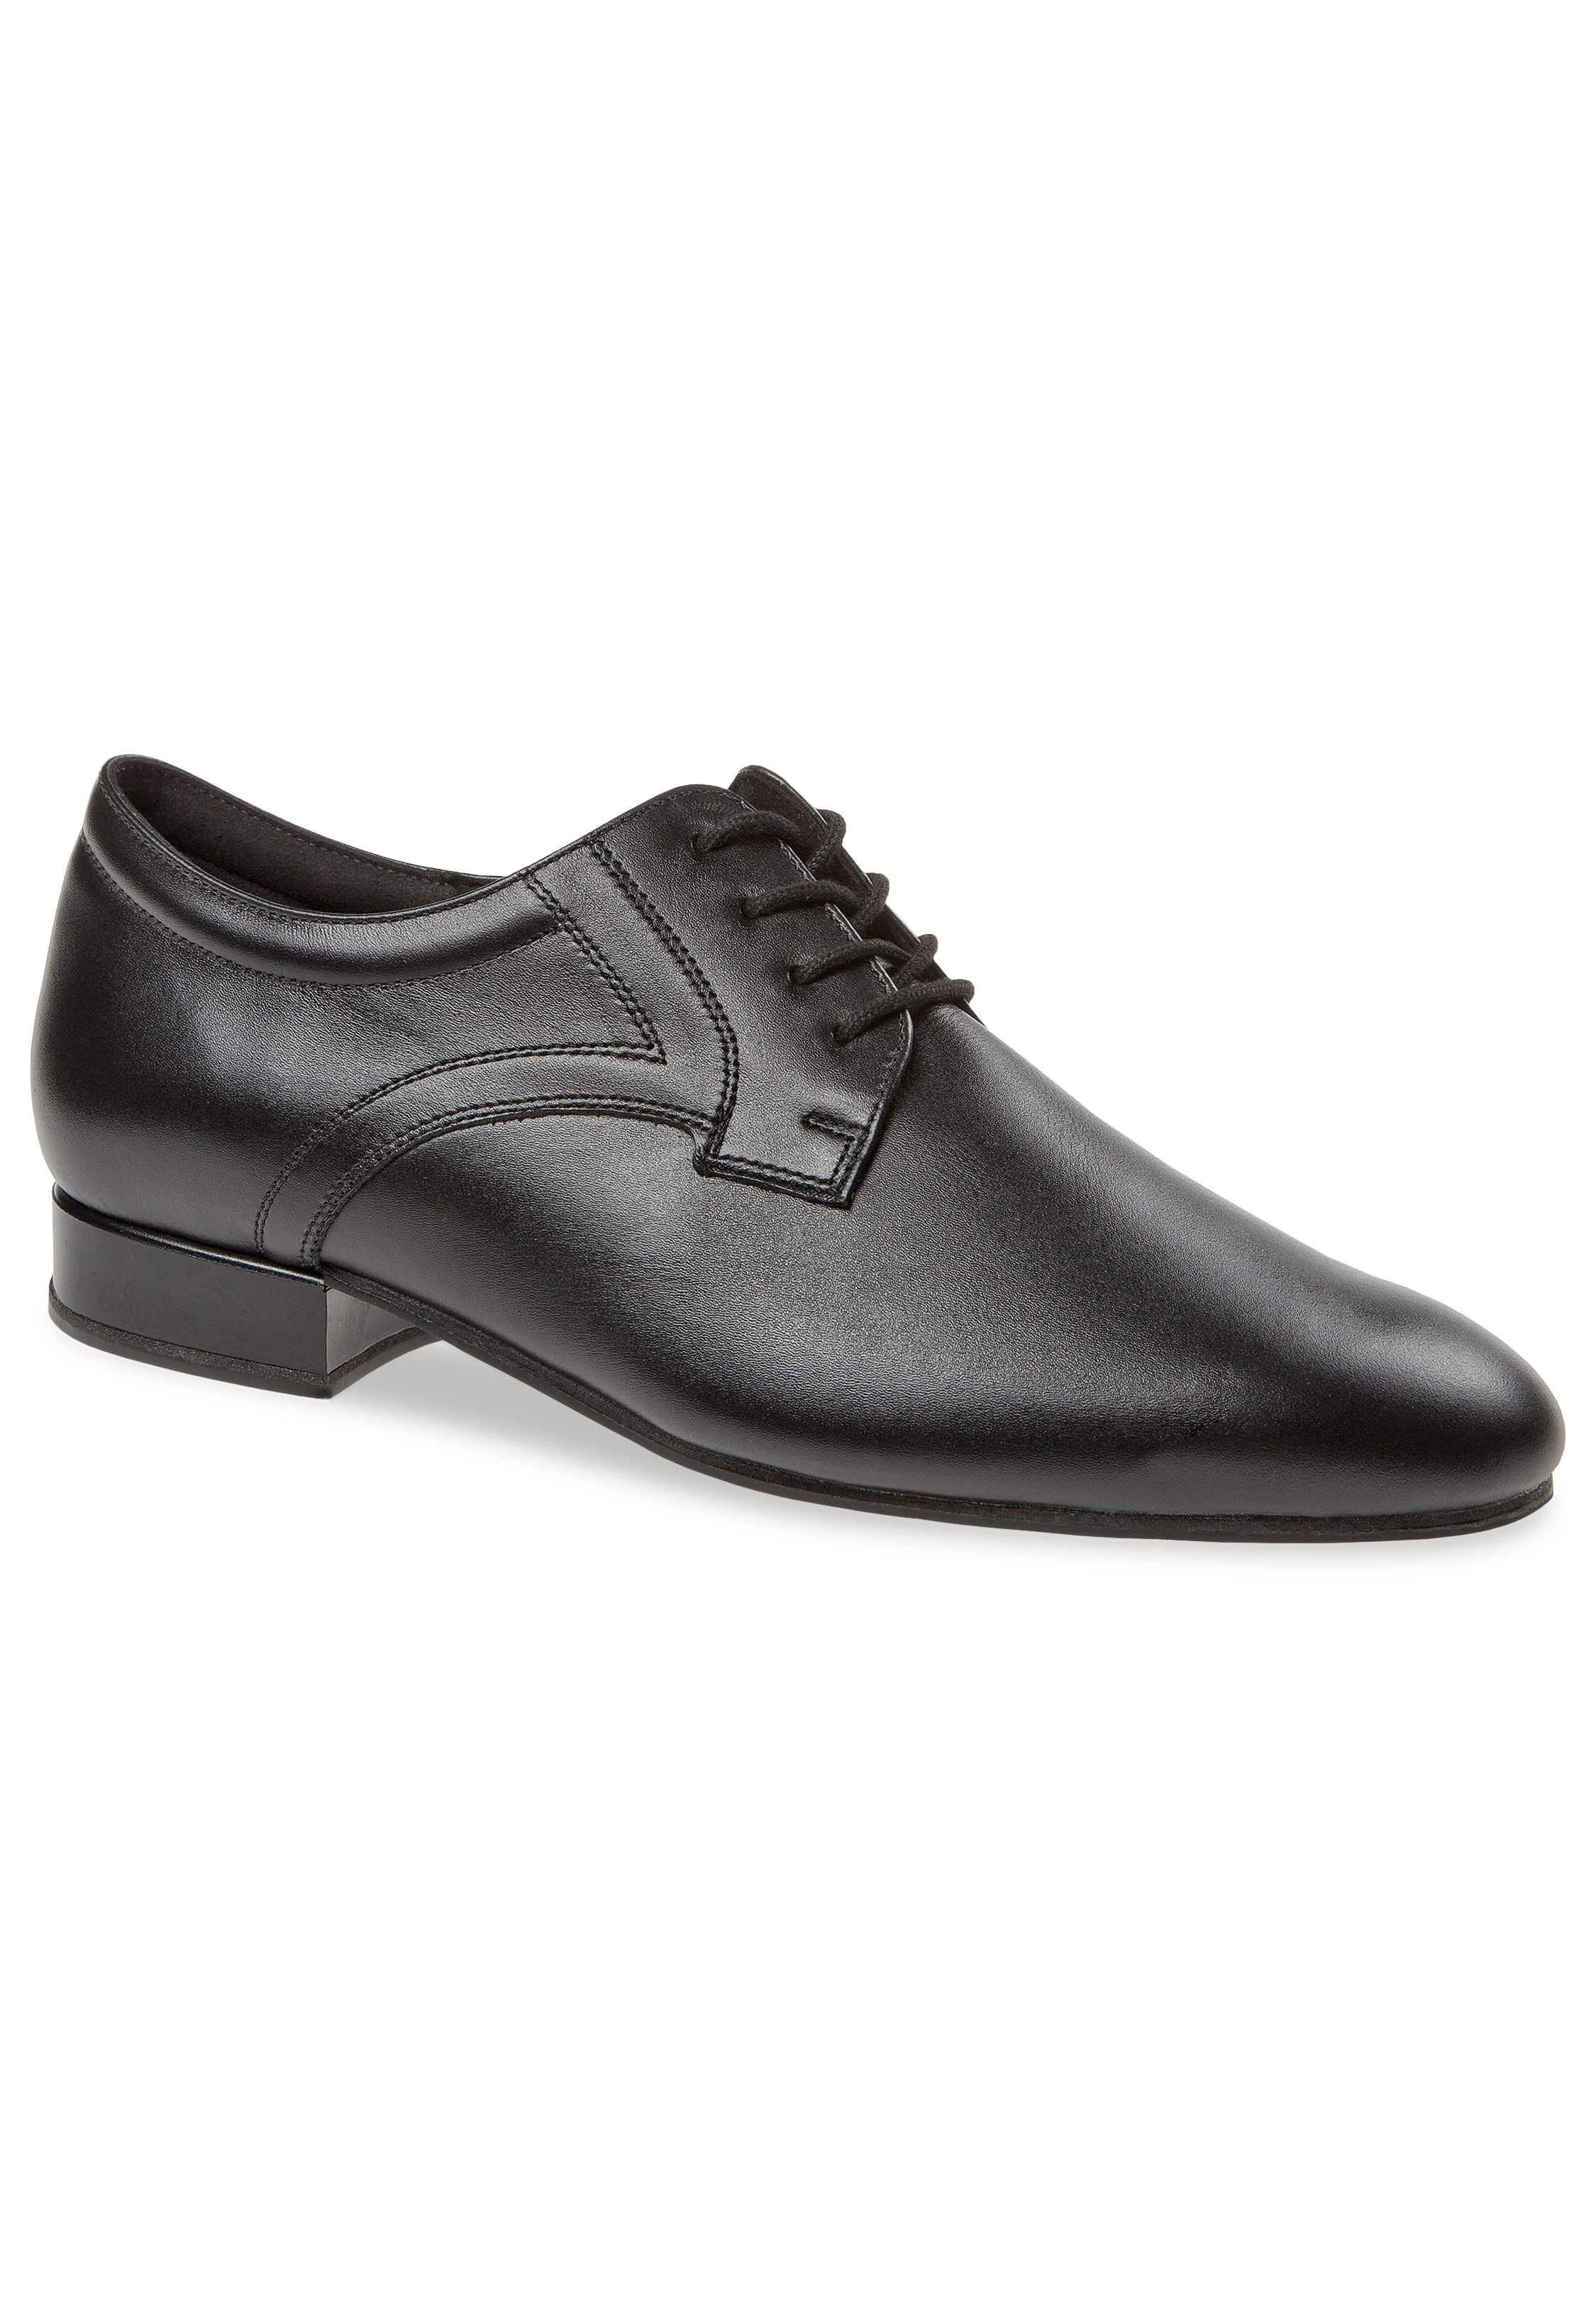 MINITOO Mens Classic Leather Standard Dance Shoes L421 